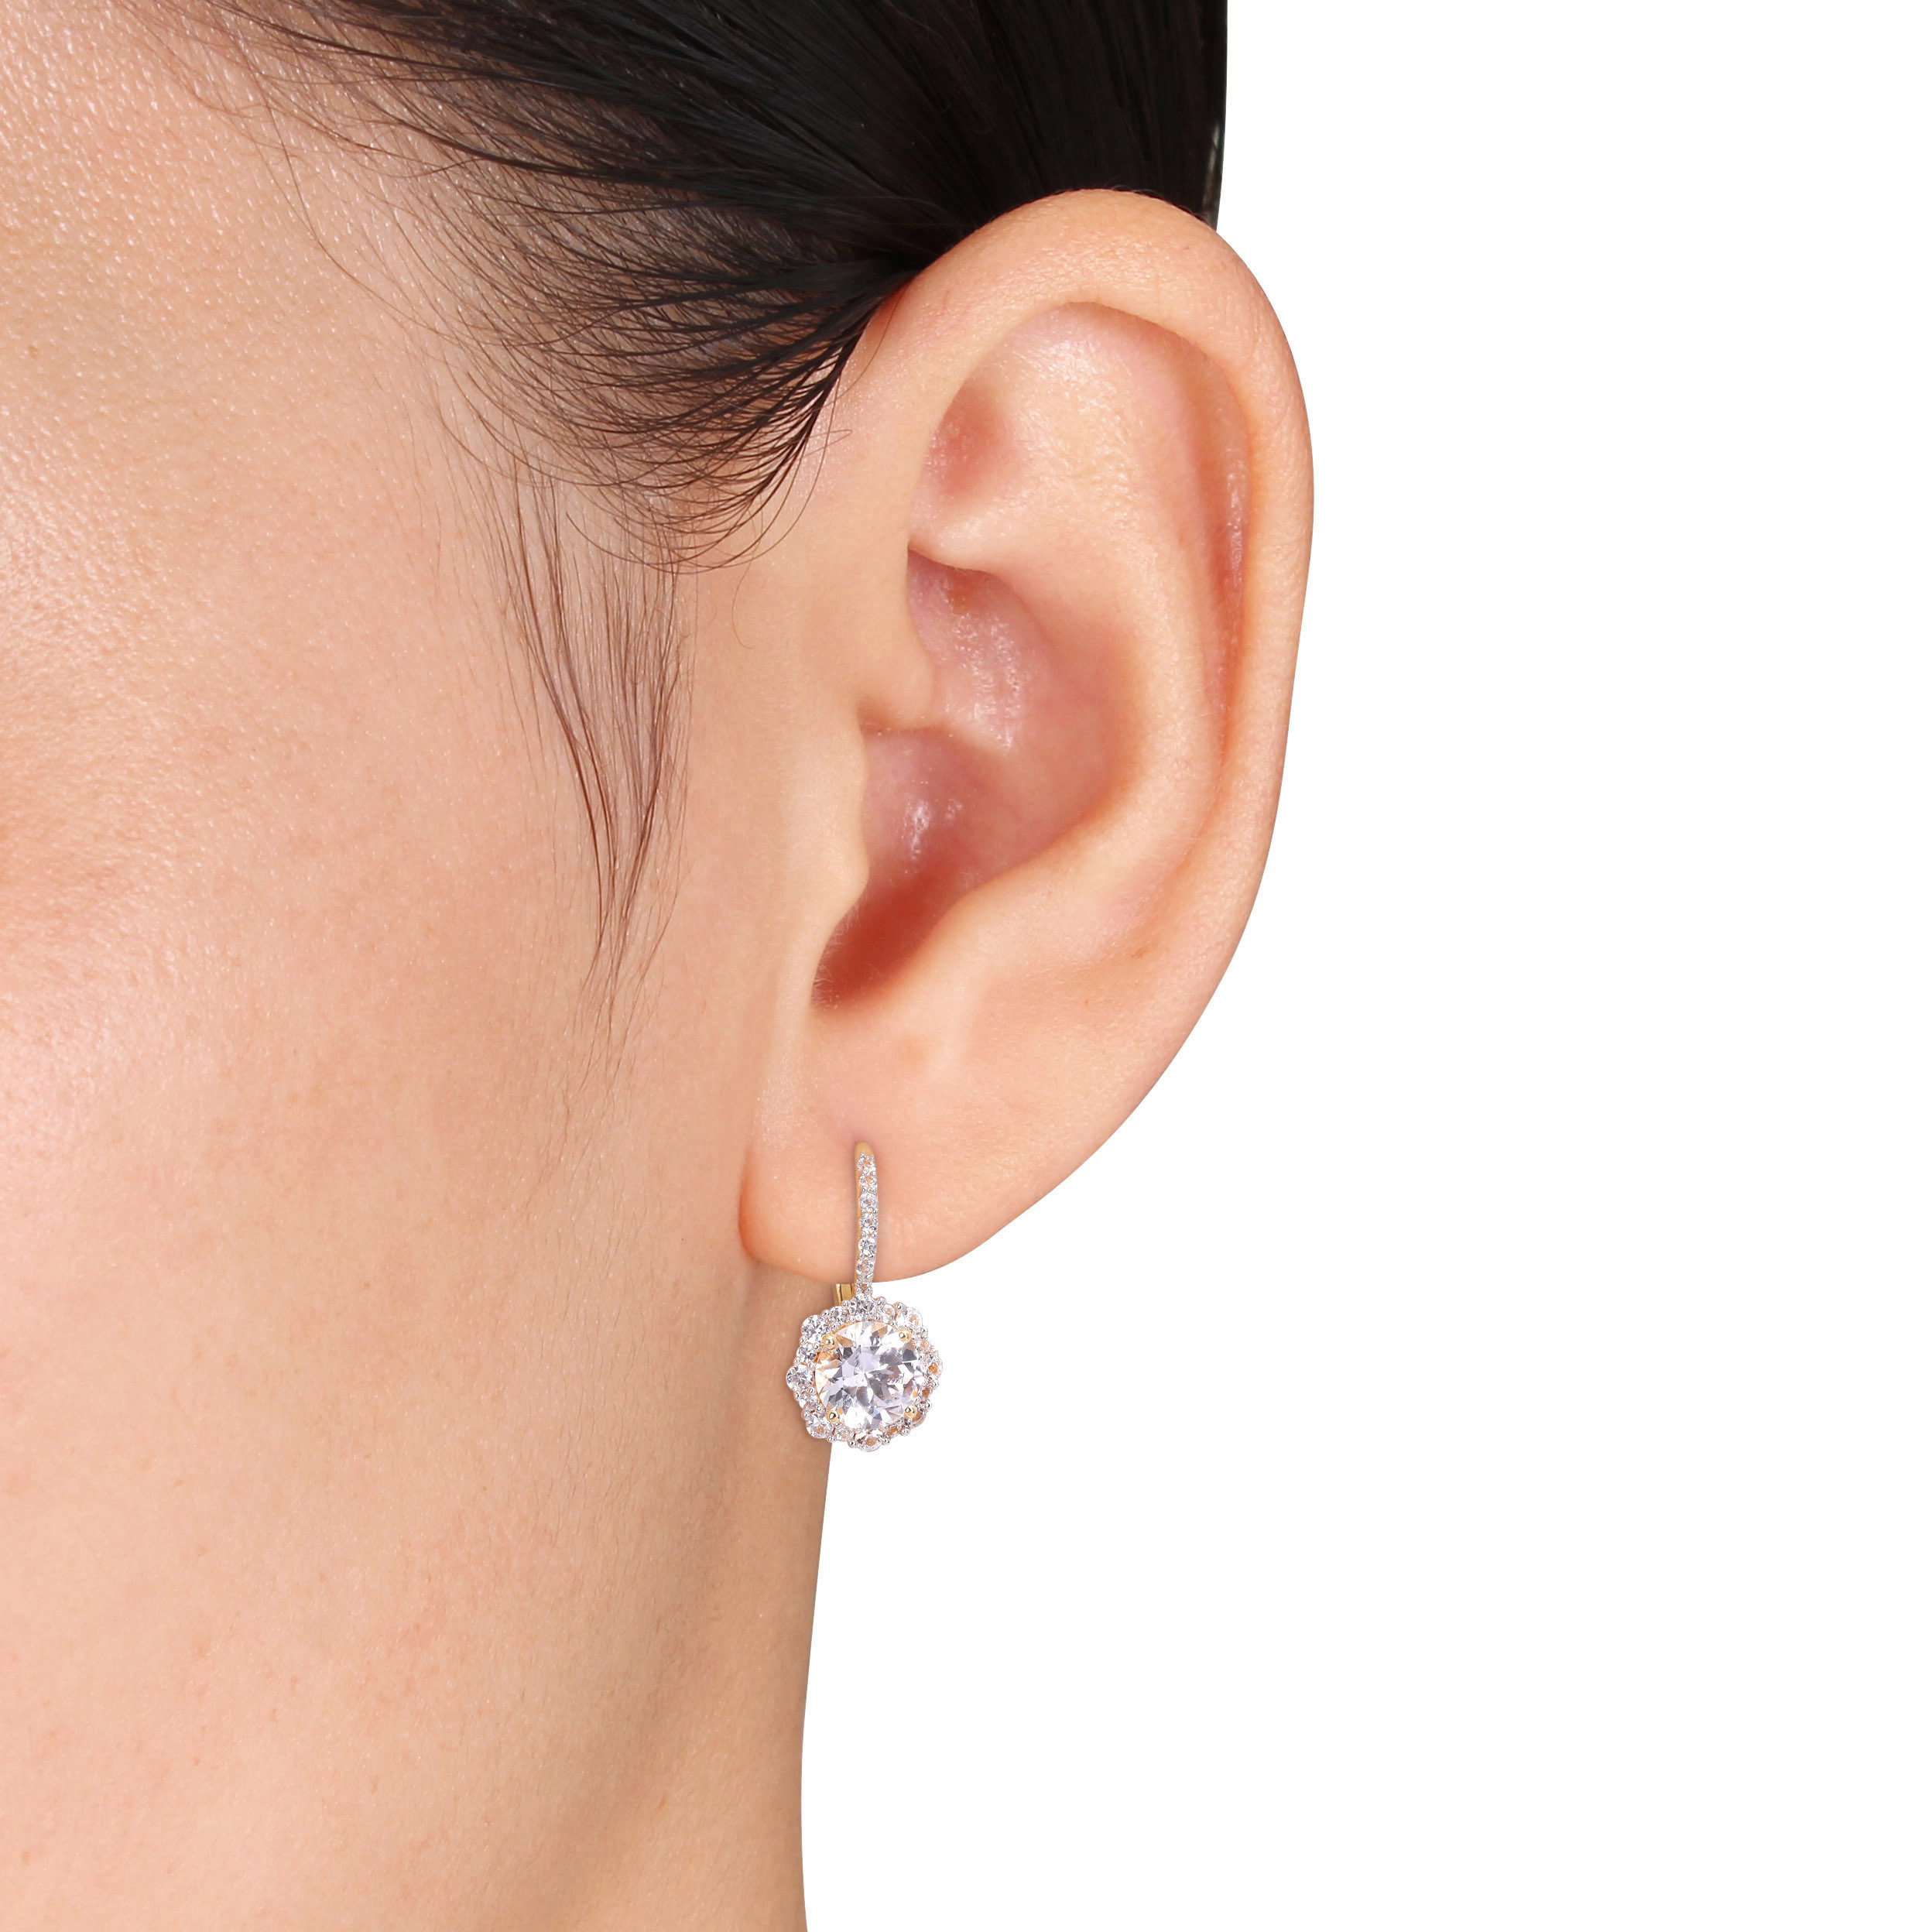 4 CT TGW Created White Sapphire Halo Leverback Earrings in Yellow Plated Sterling Silver